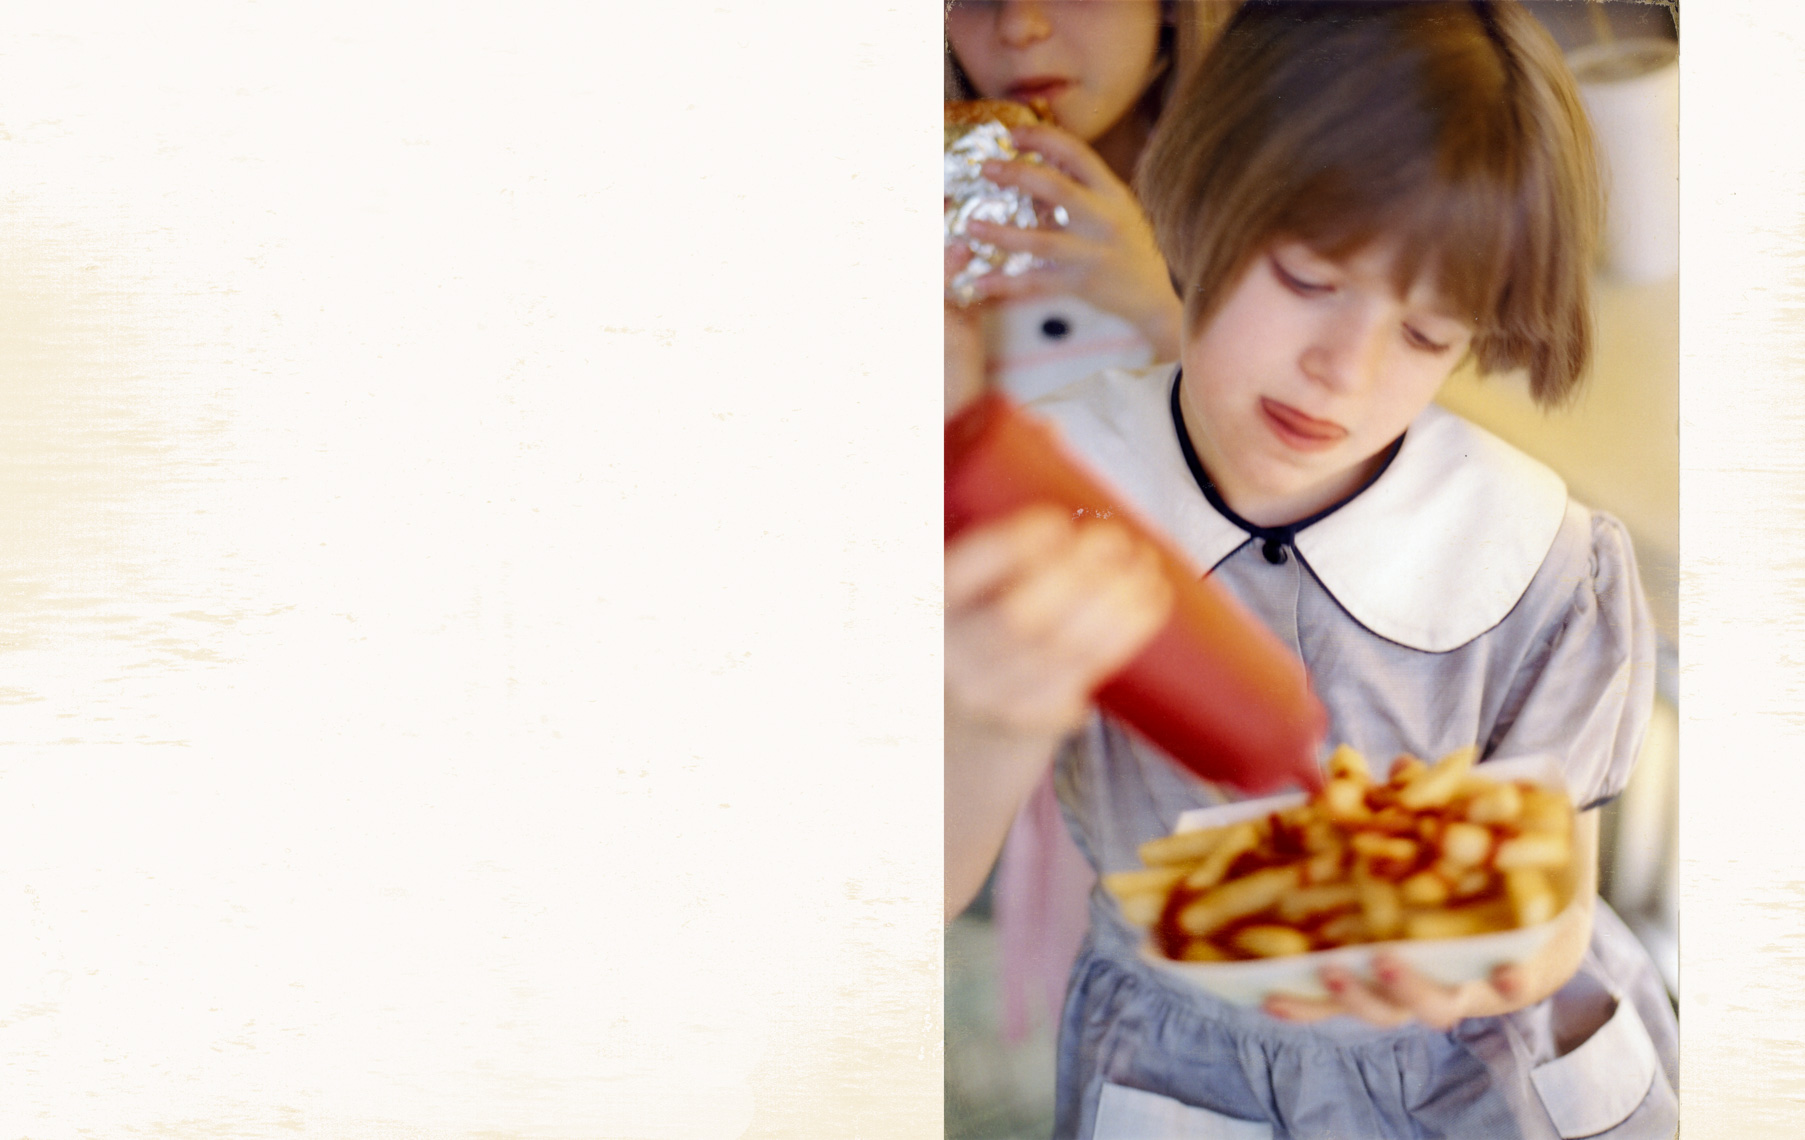 Pouring ketchup on french fries | Austin Photoshoot